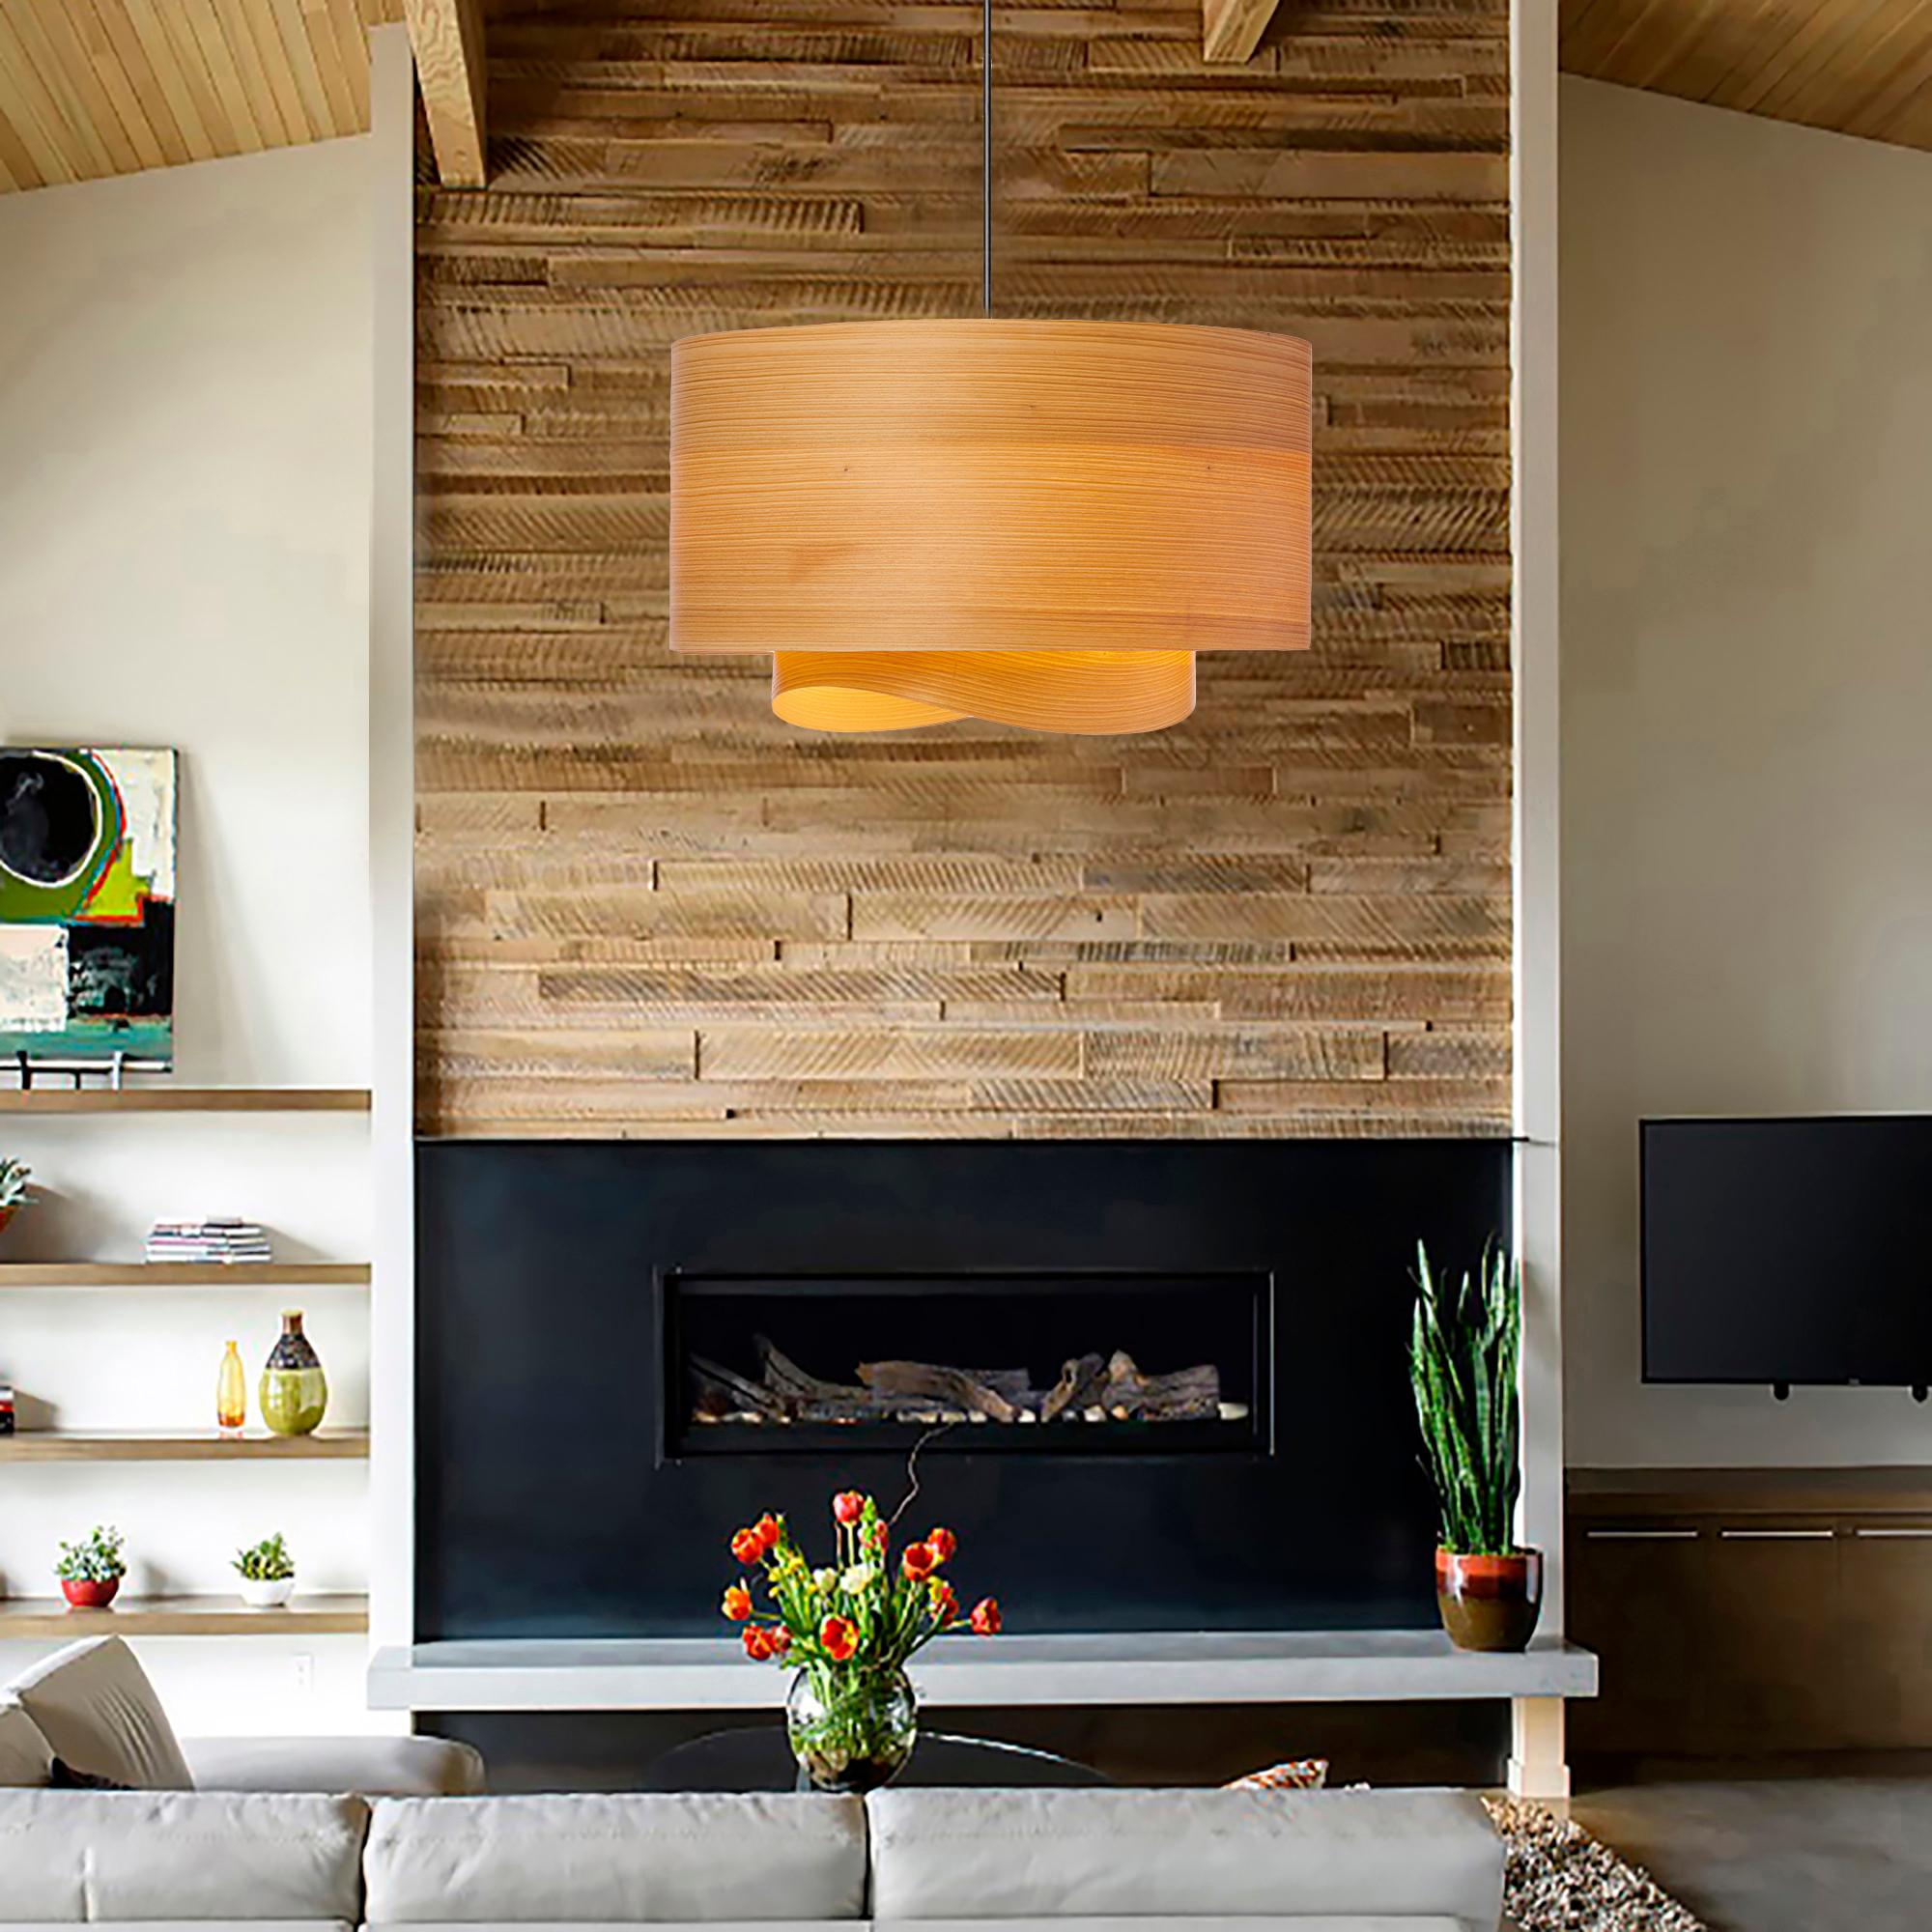 This limited-edition Half BOWEN pendant light is made with cypress wood veneer, a rare and natural treasure with unexpected and beautiful variation in the wood grain. Each light is a unique wood art piece, with its own unique variations, including